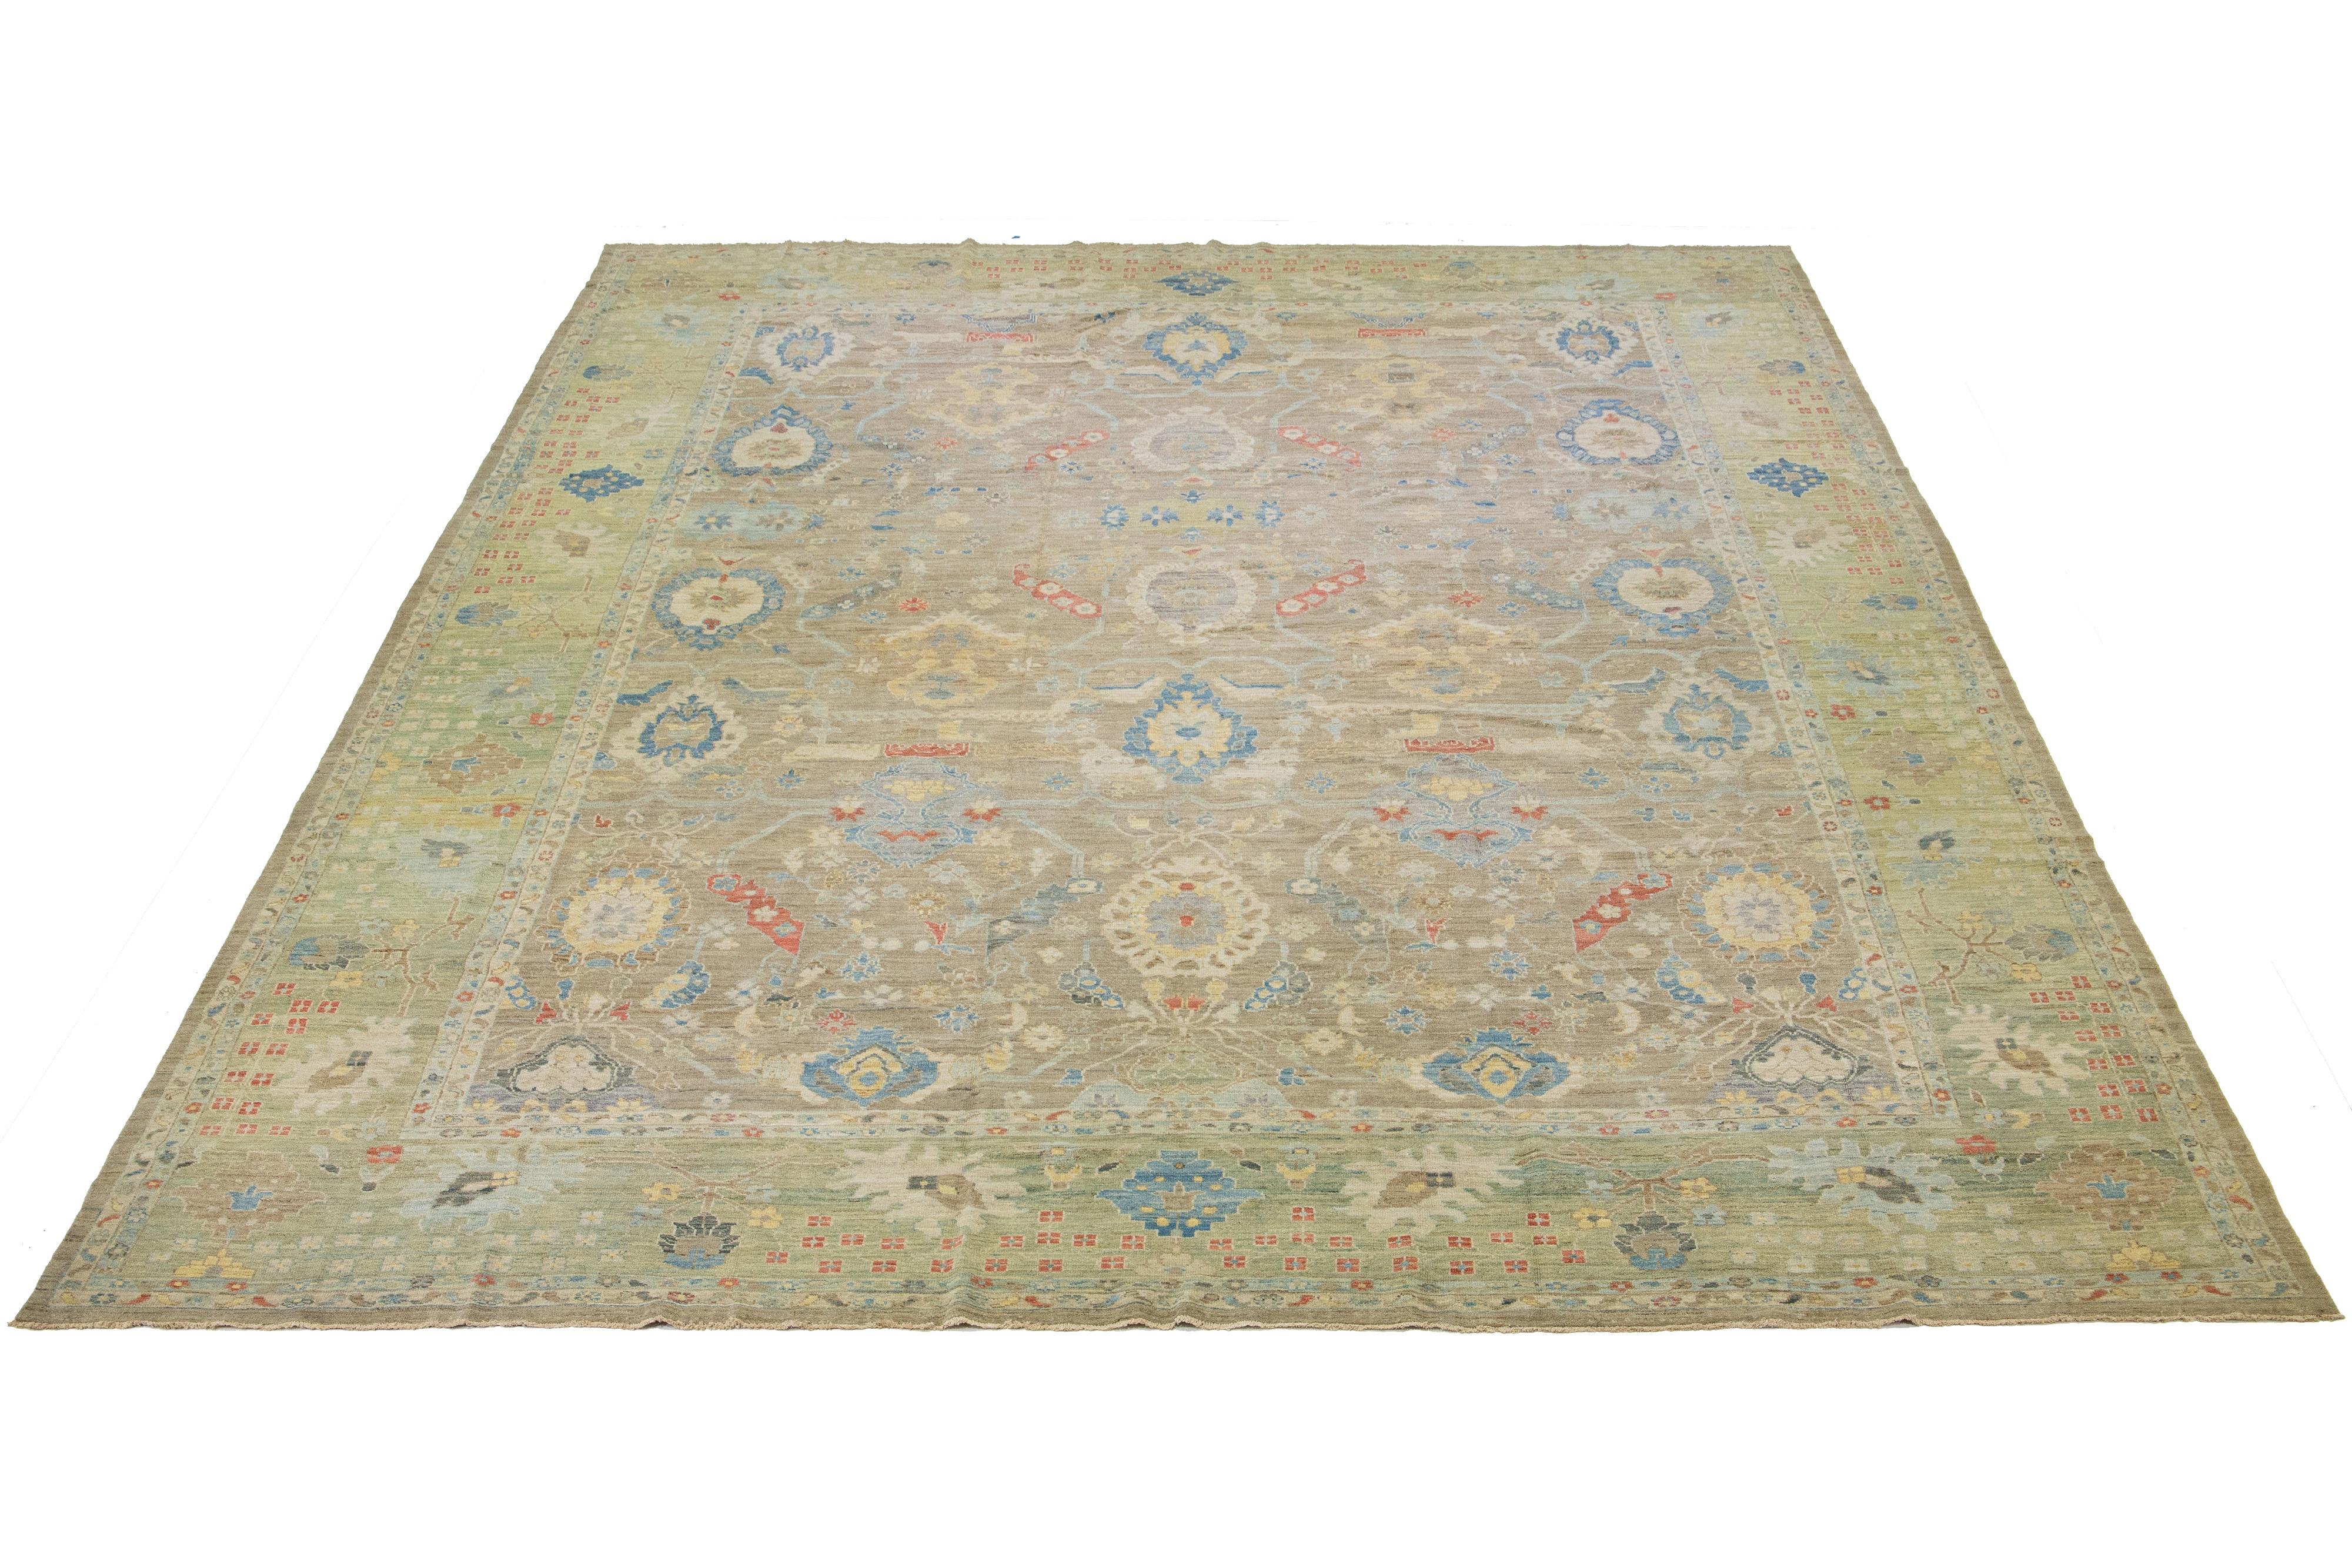 This oversized Sultanabad classic style has been meticulously transformed into a contemporary masterpiece. Crafted with great care, this magnificent wool rug has a light brown field with a green frame. Its all-over floral motif. To enhance its